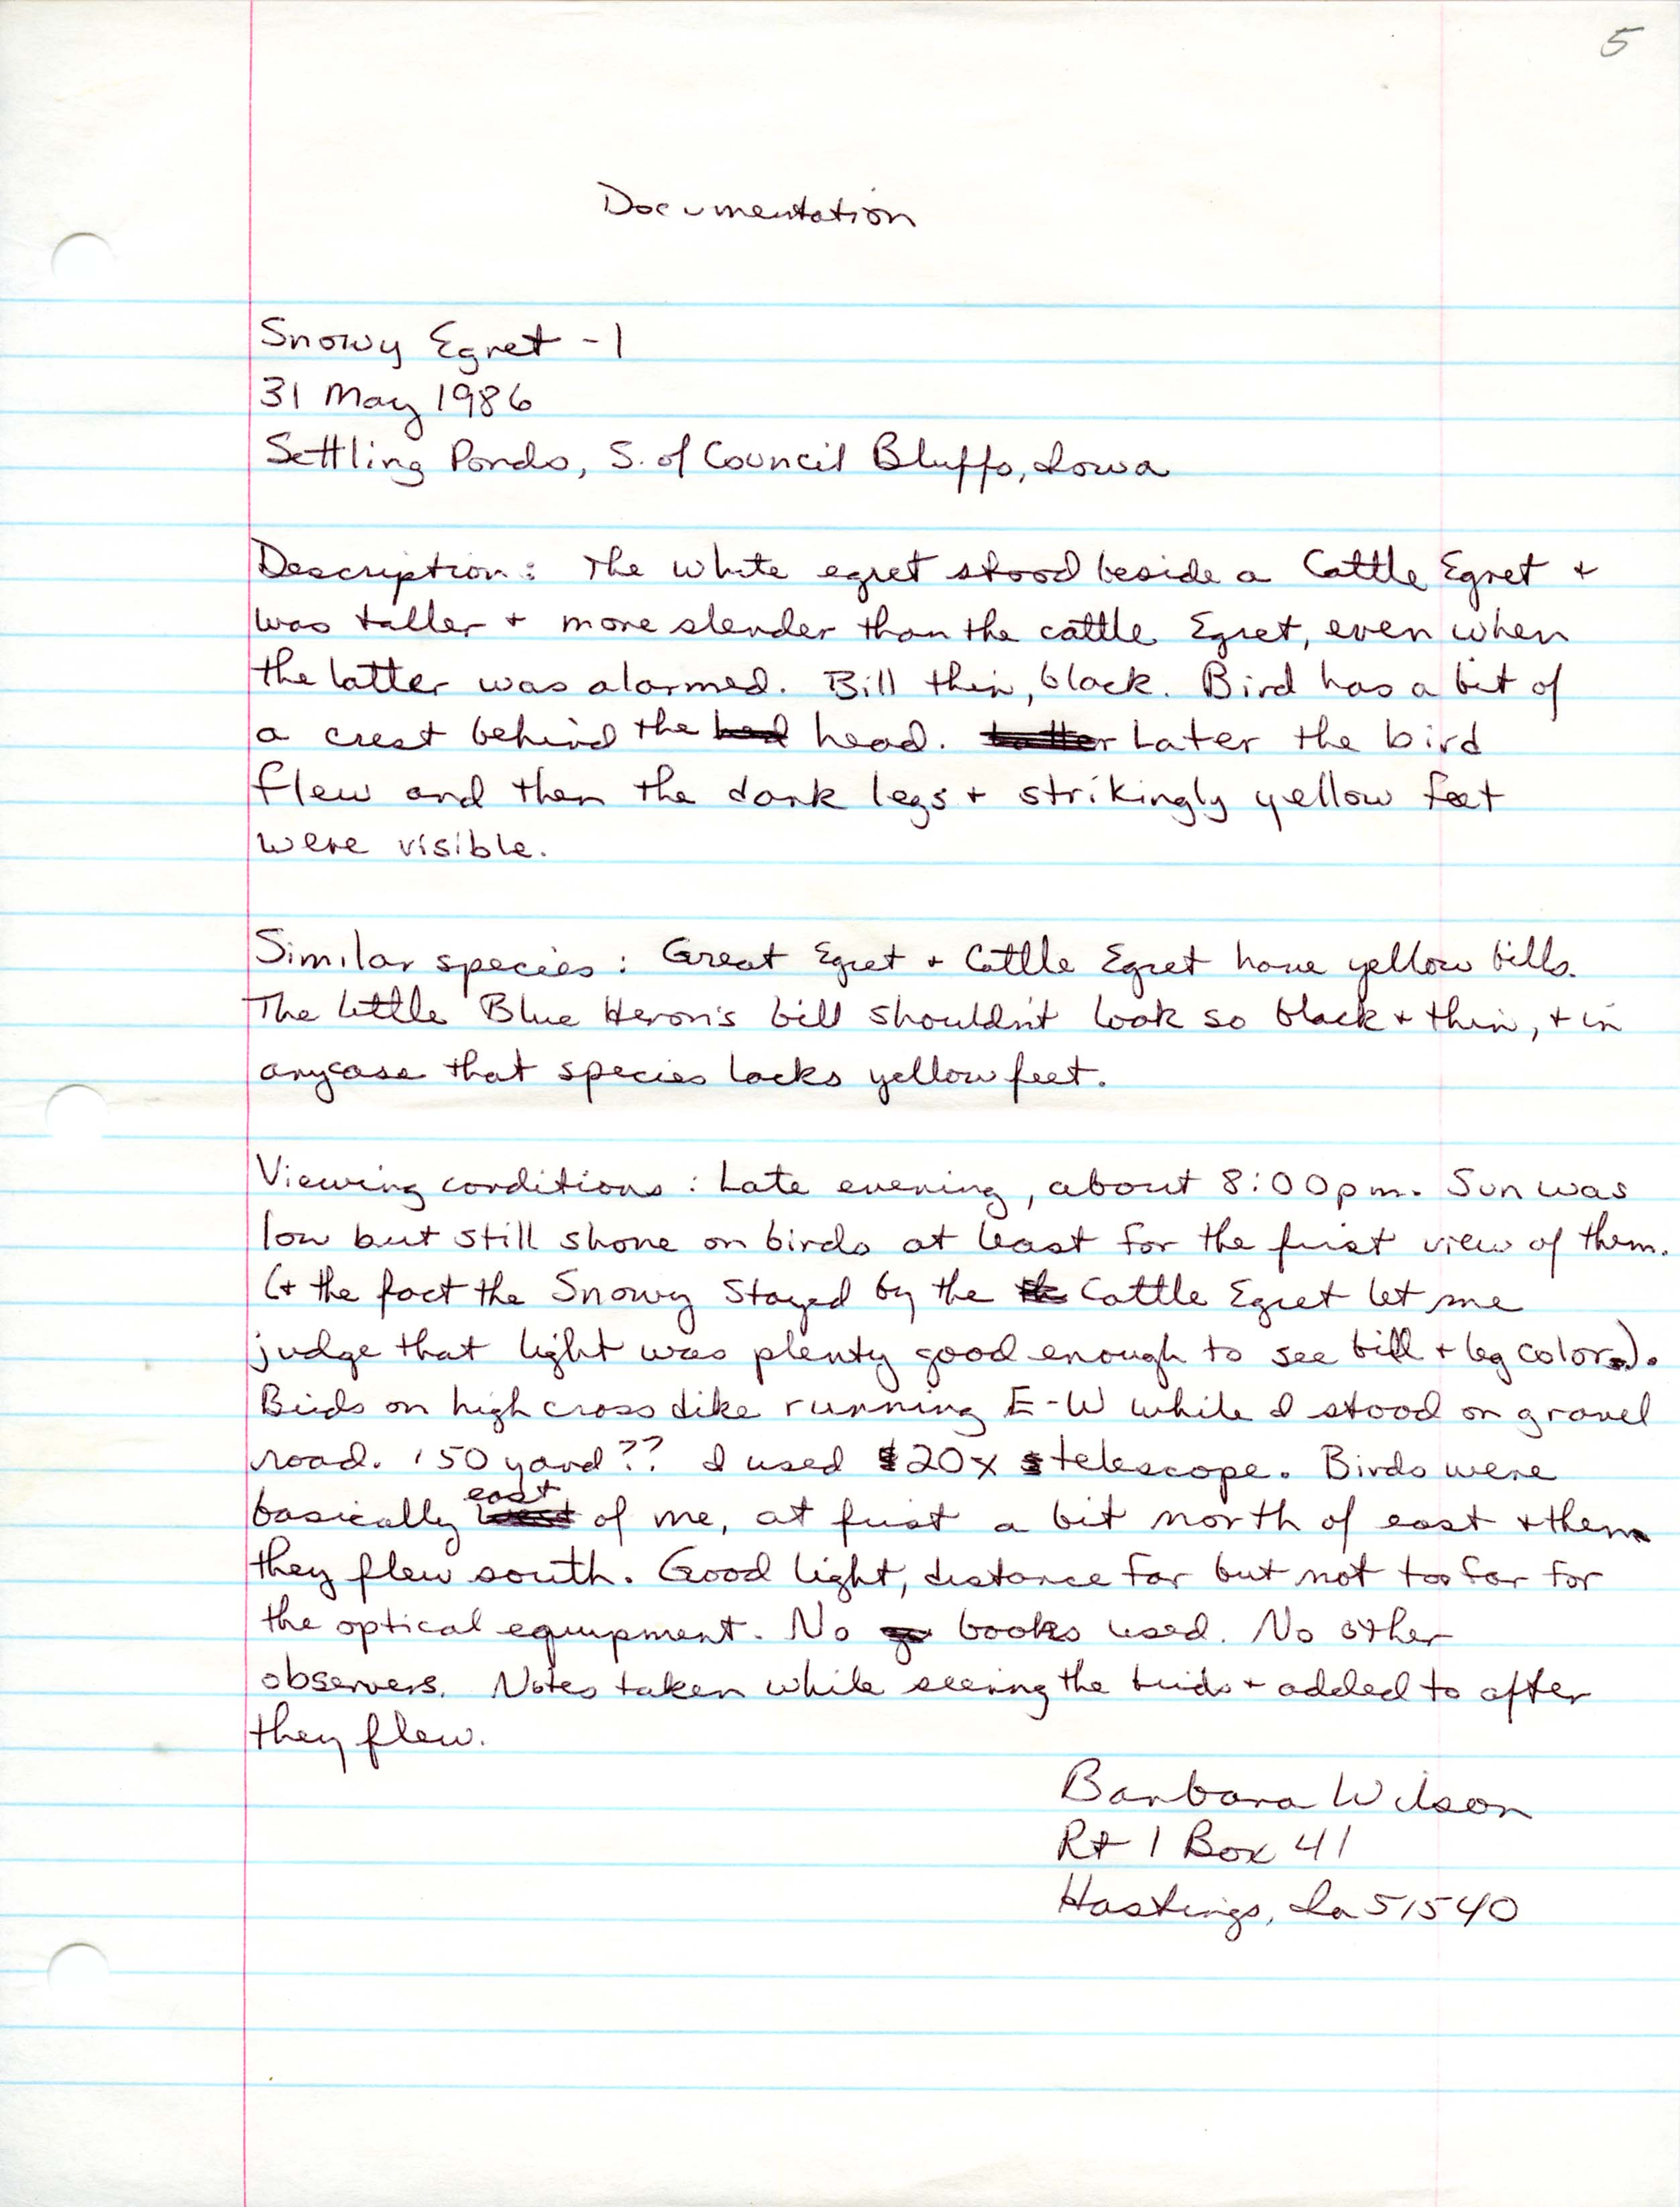 Rare bird documentation form for Snowy Egret at Settling Ponds south of Council Bluffs, 1986